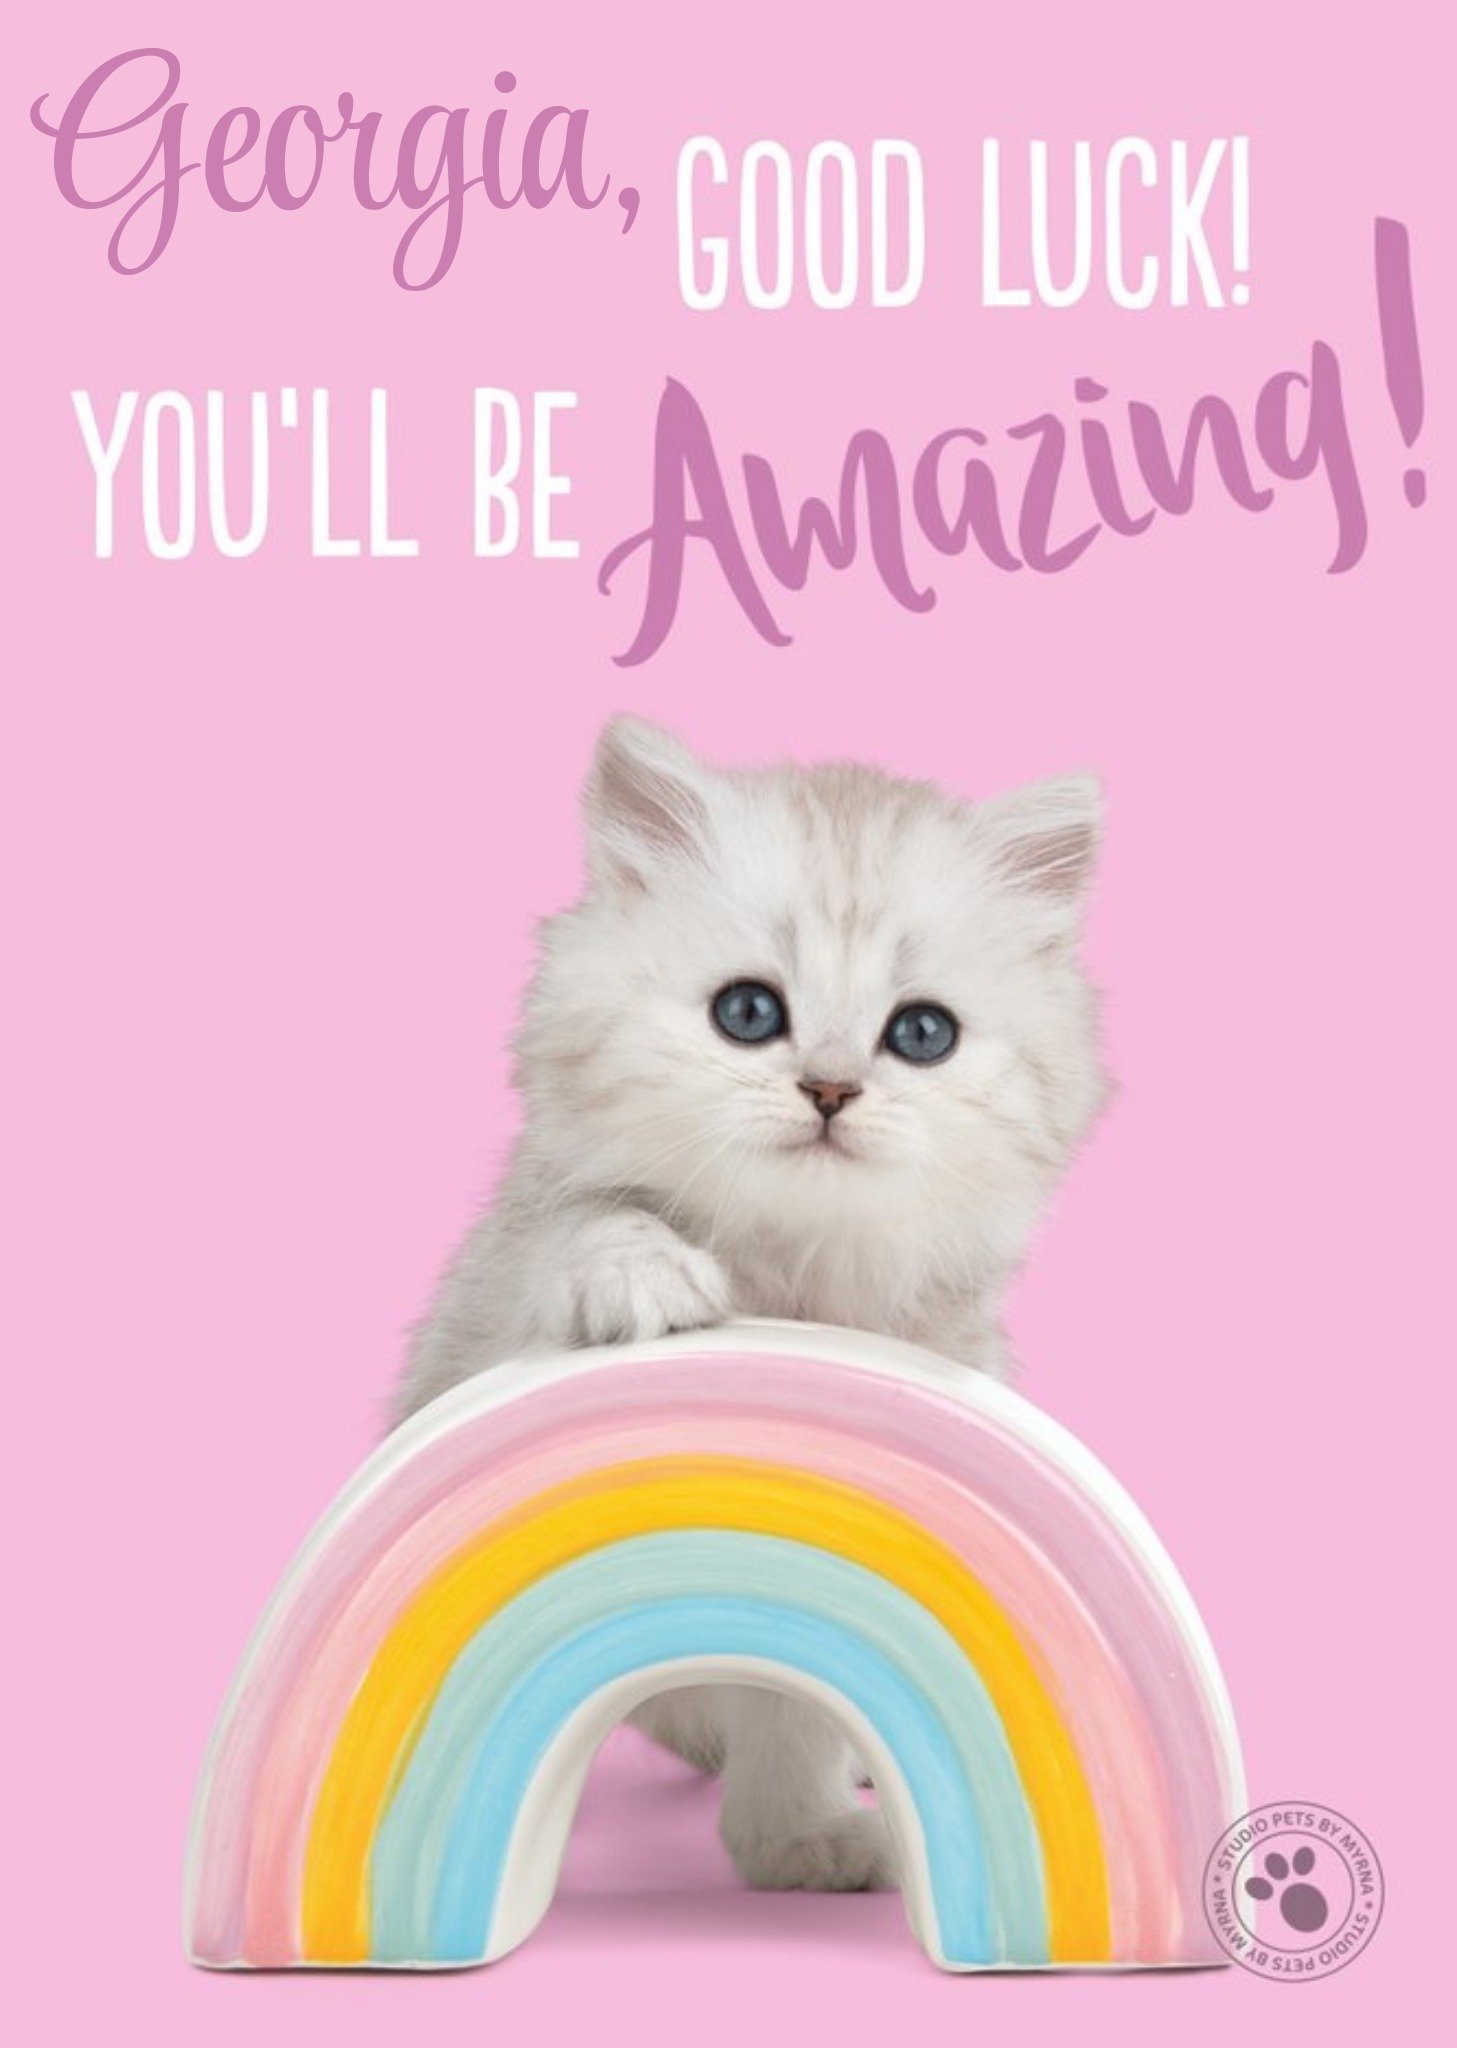 Studio Pets Cute Kitten You'll Be Amazing Good Luck Card, Large